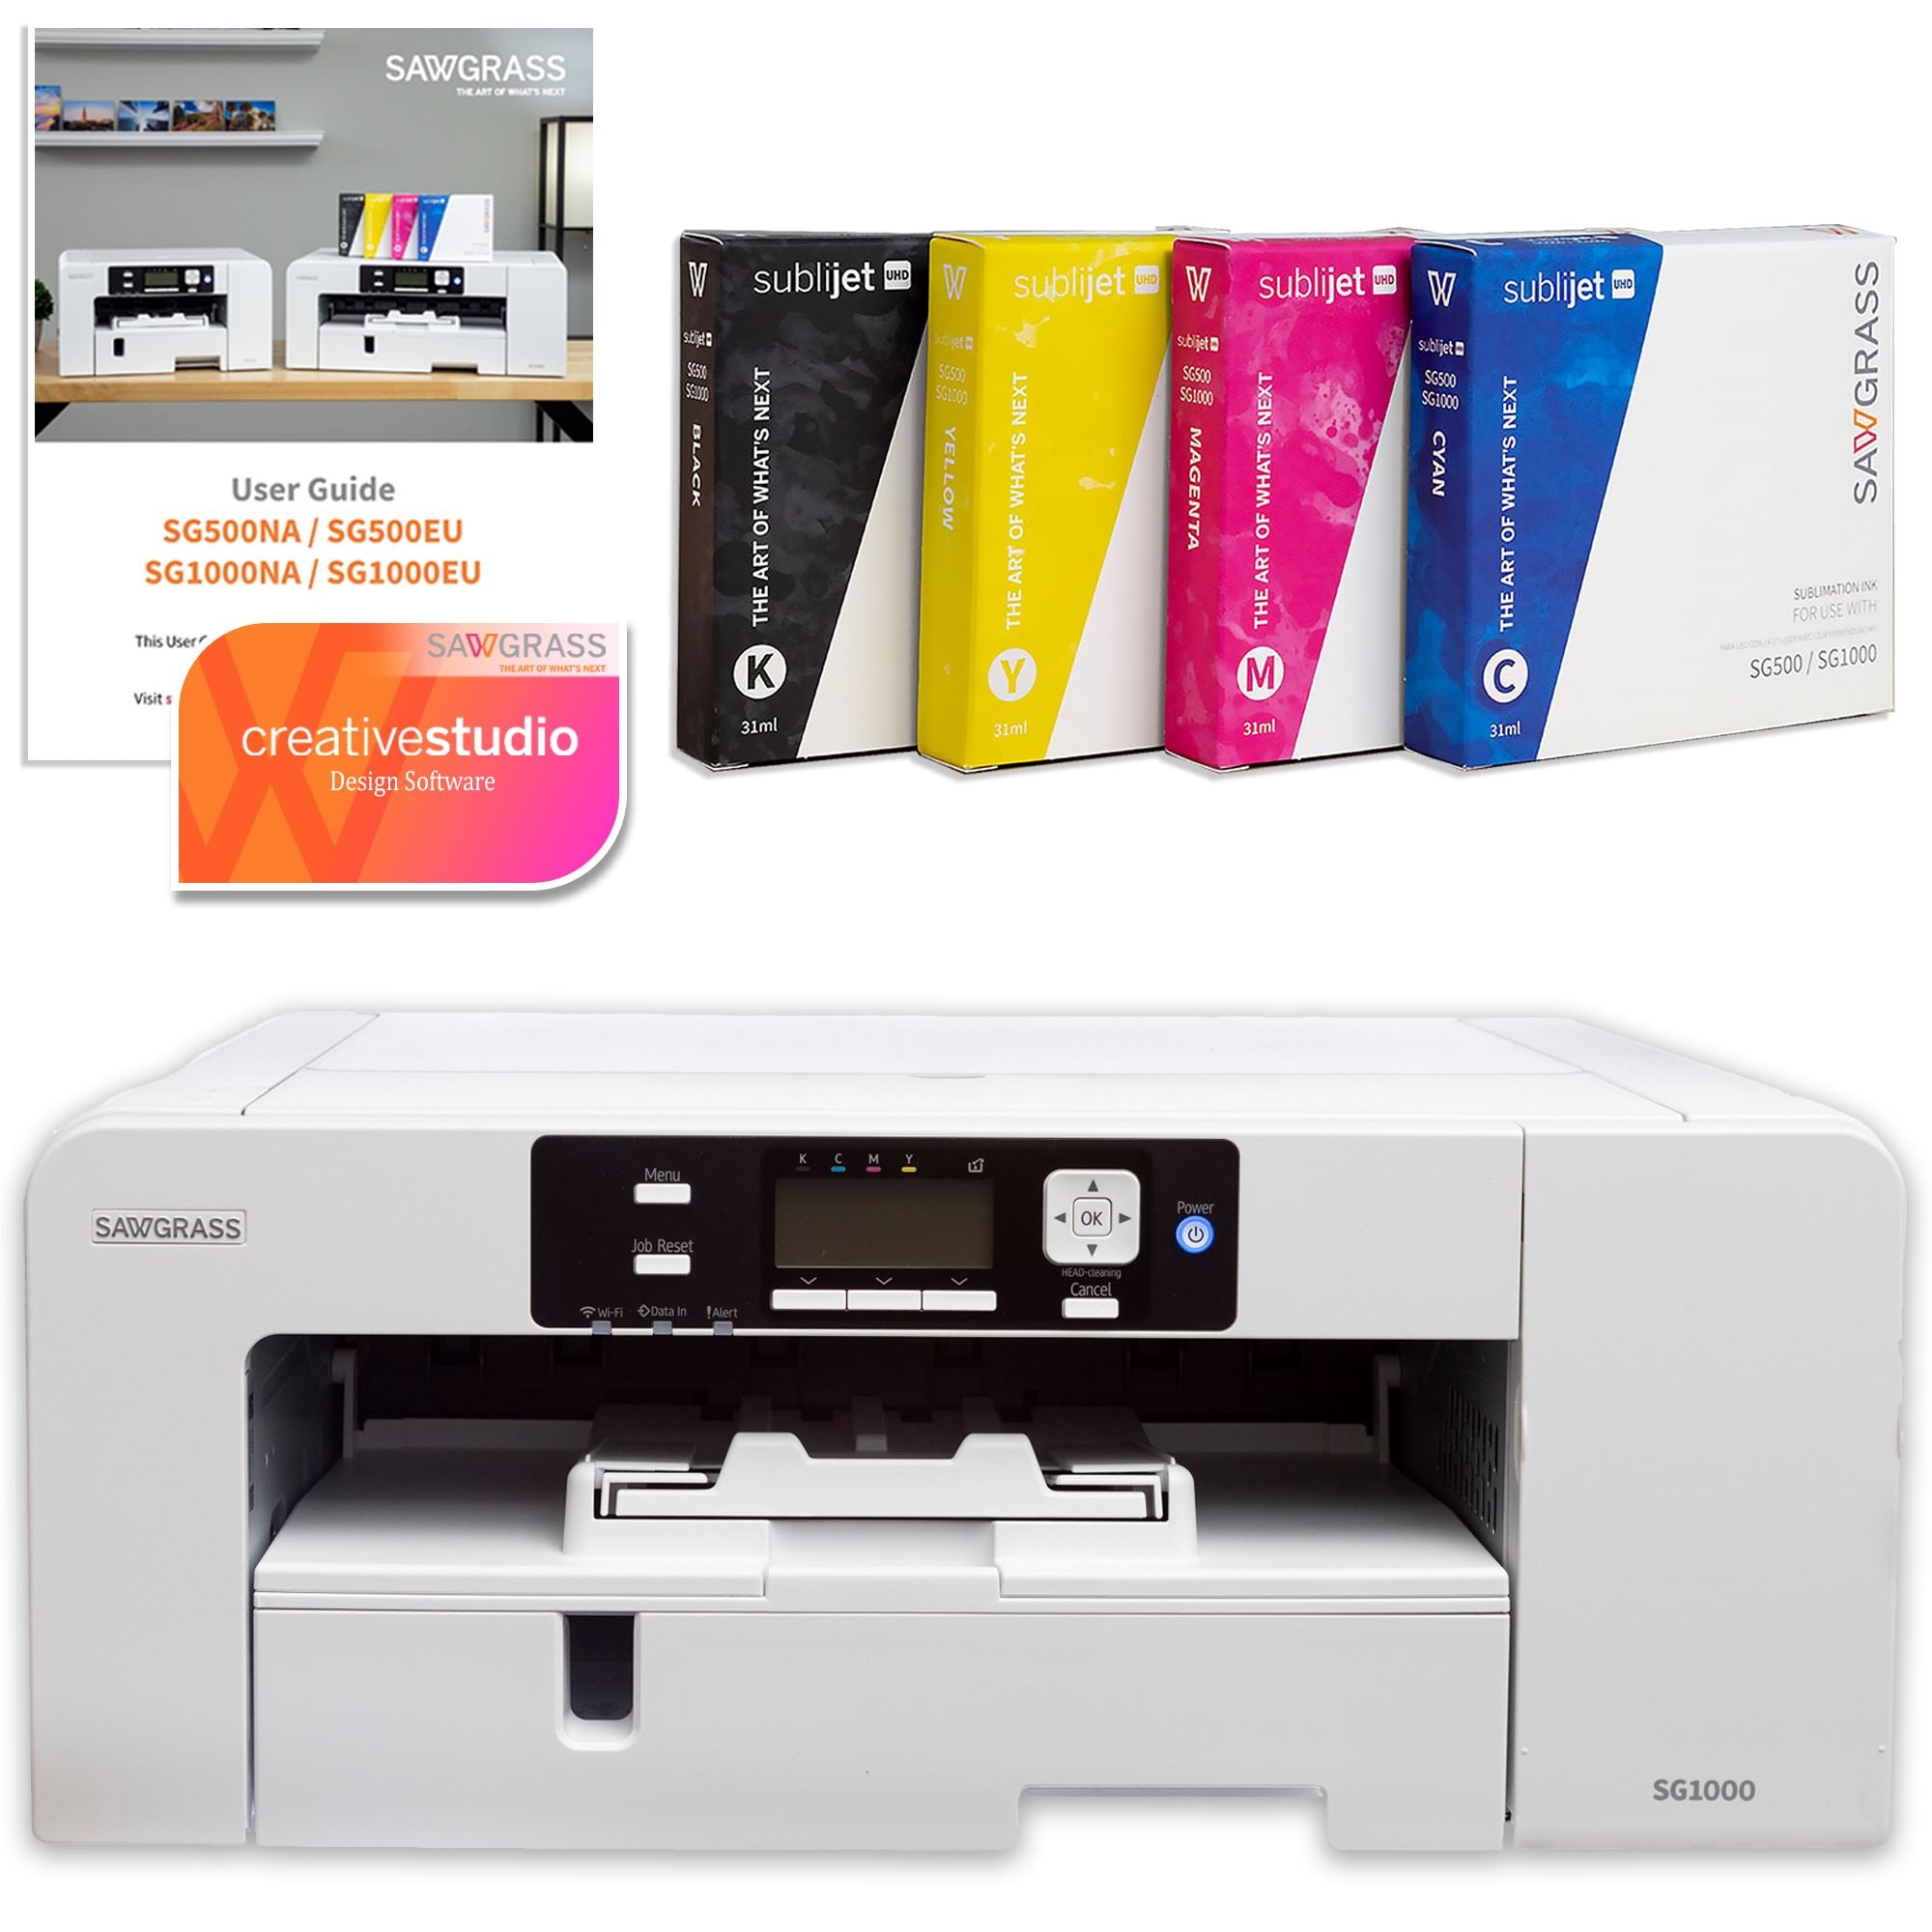 Best Sawgrass sublimation printer for small business: Sawgrass Virtuoso SG1000